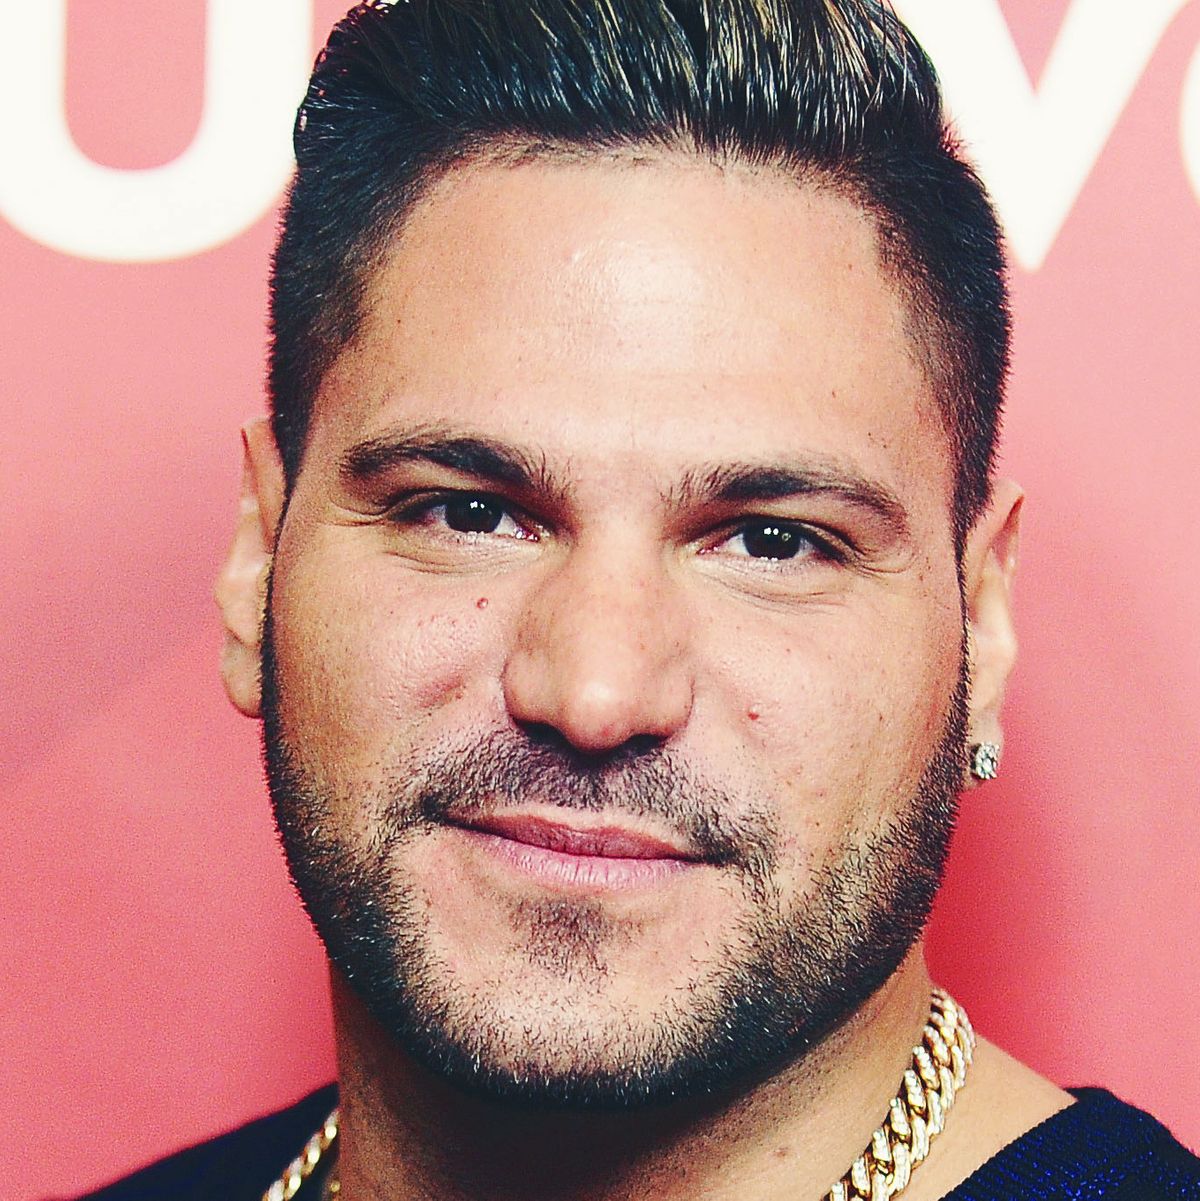 Ronnie Ortiz-Magro & Jen Harley Break Up After Insta Fight